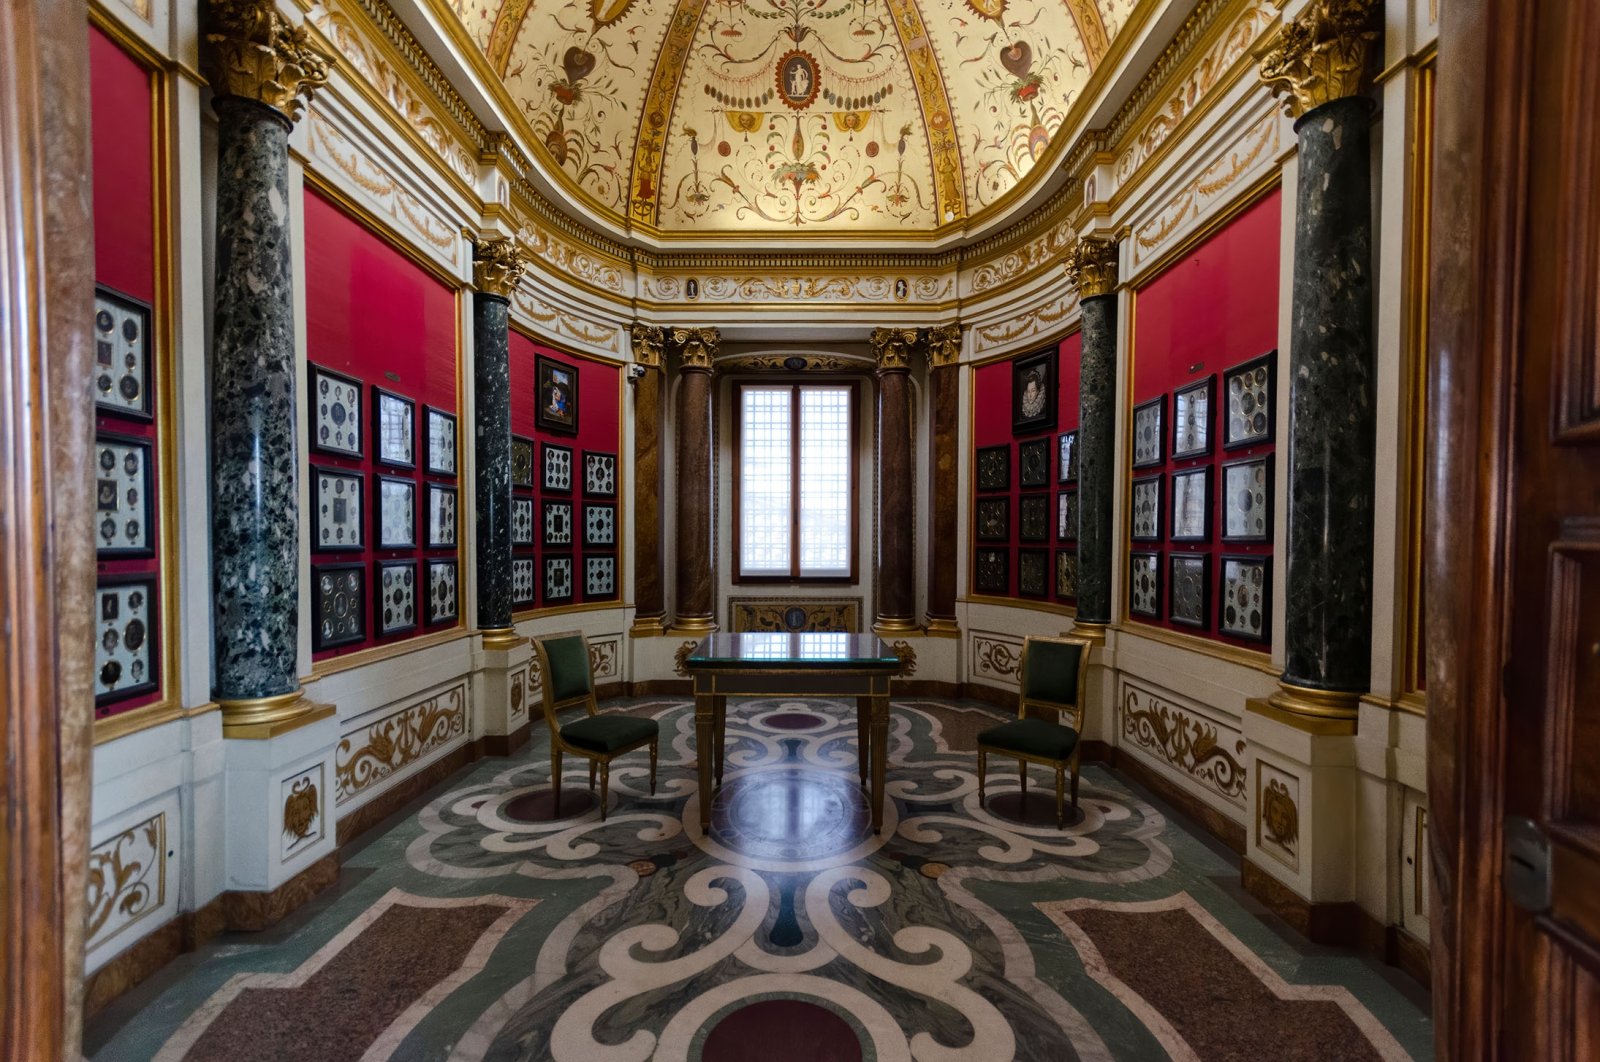 The interior of the Uffizi museum Gallery, the most famous museum in Florence, Italy, Feb. 14, 2020. (Shutterstock Photo)